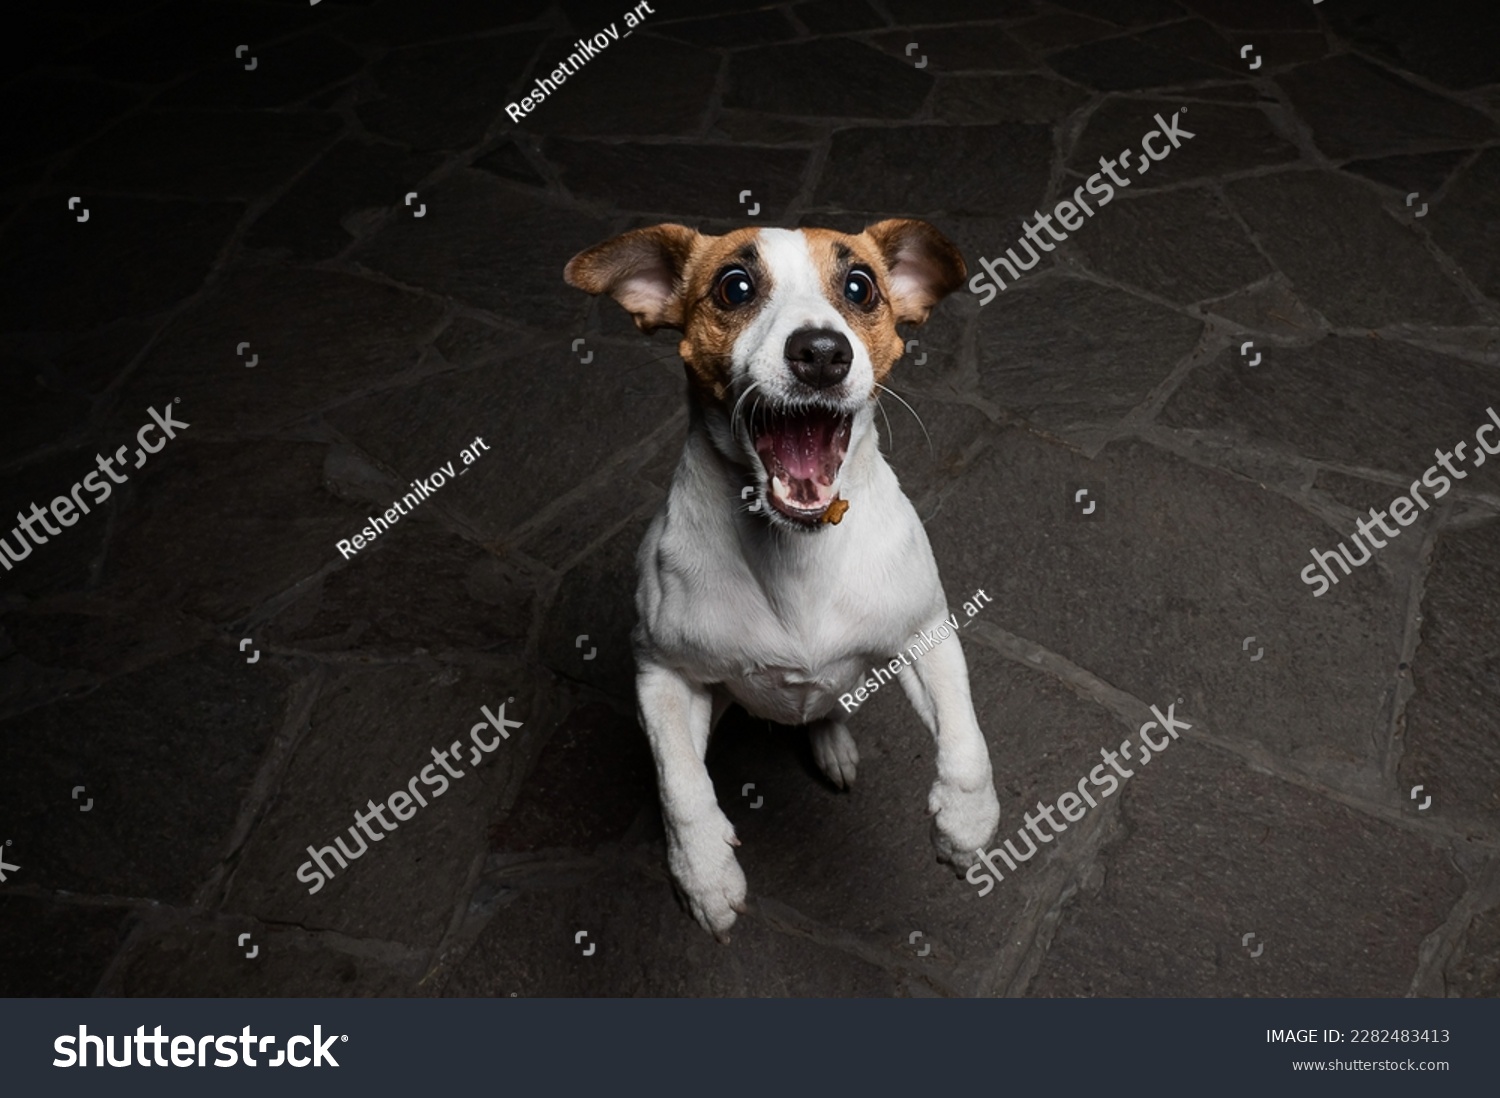 Funny Jack Russell Terrier dog catches dry food on the fly. #2282483413